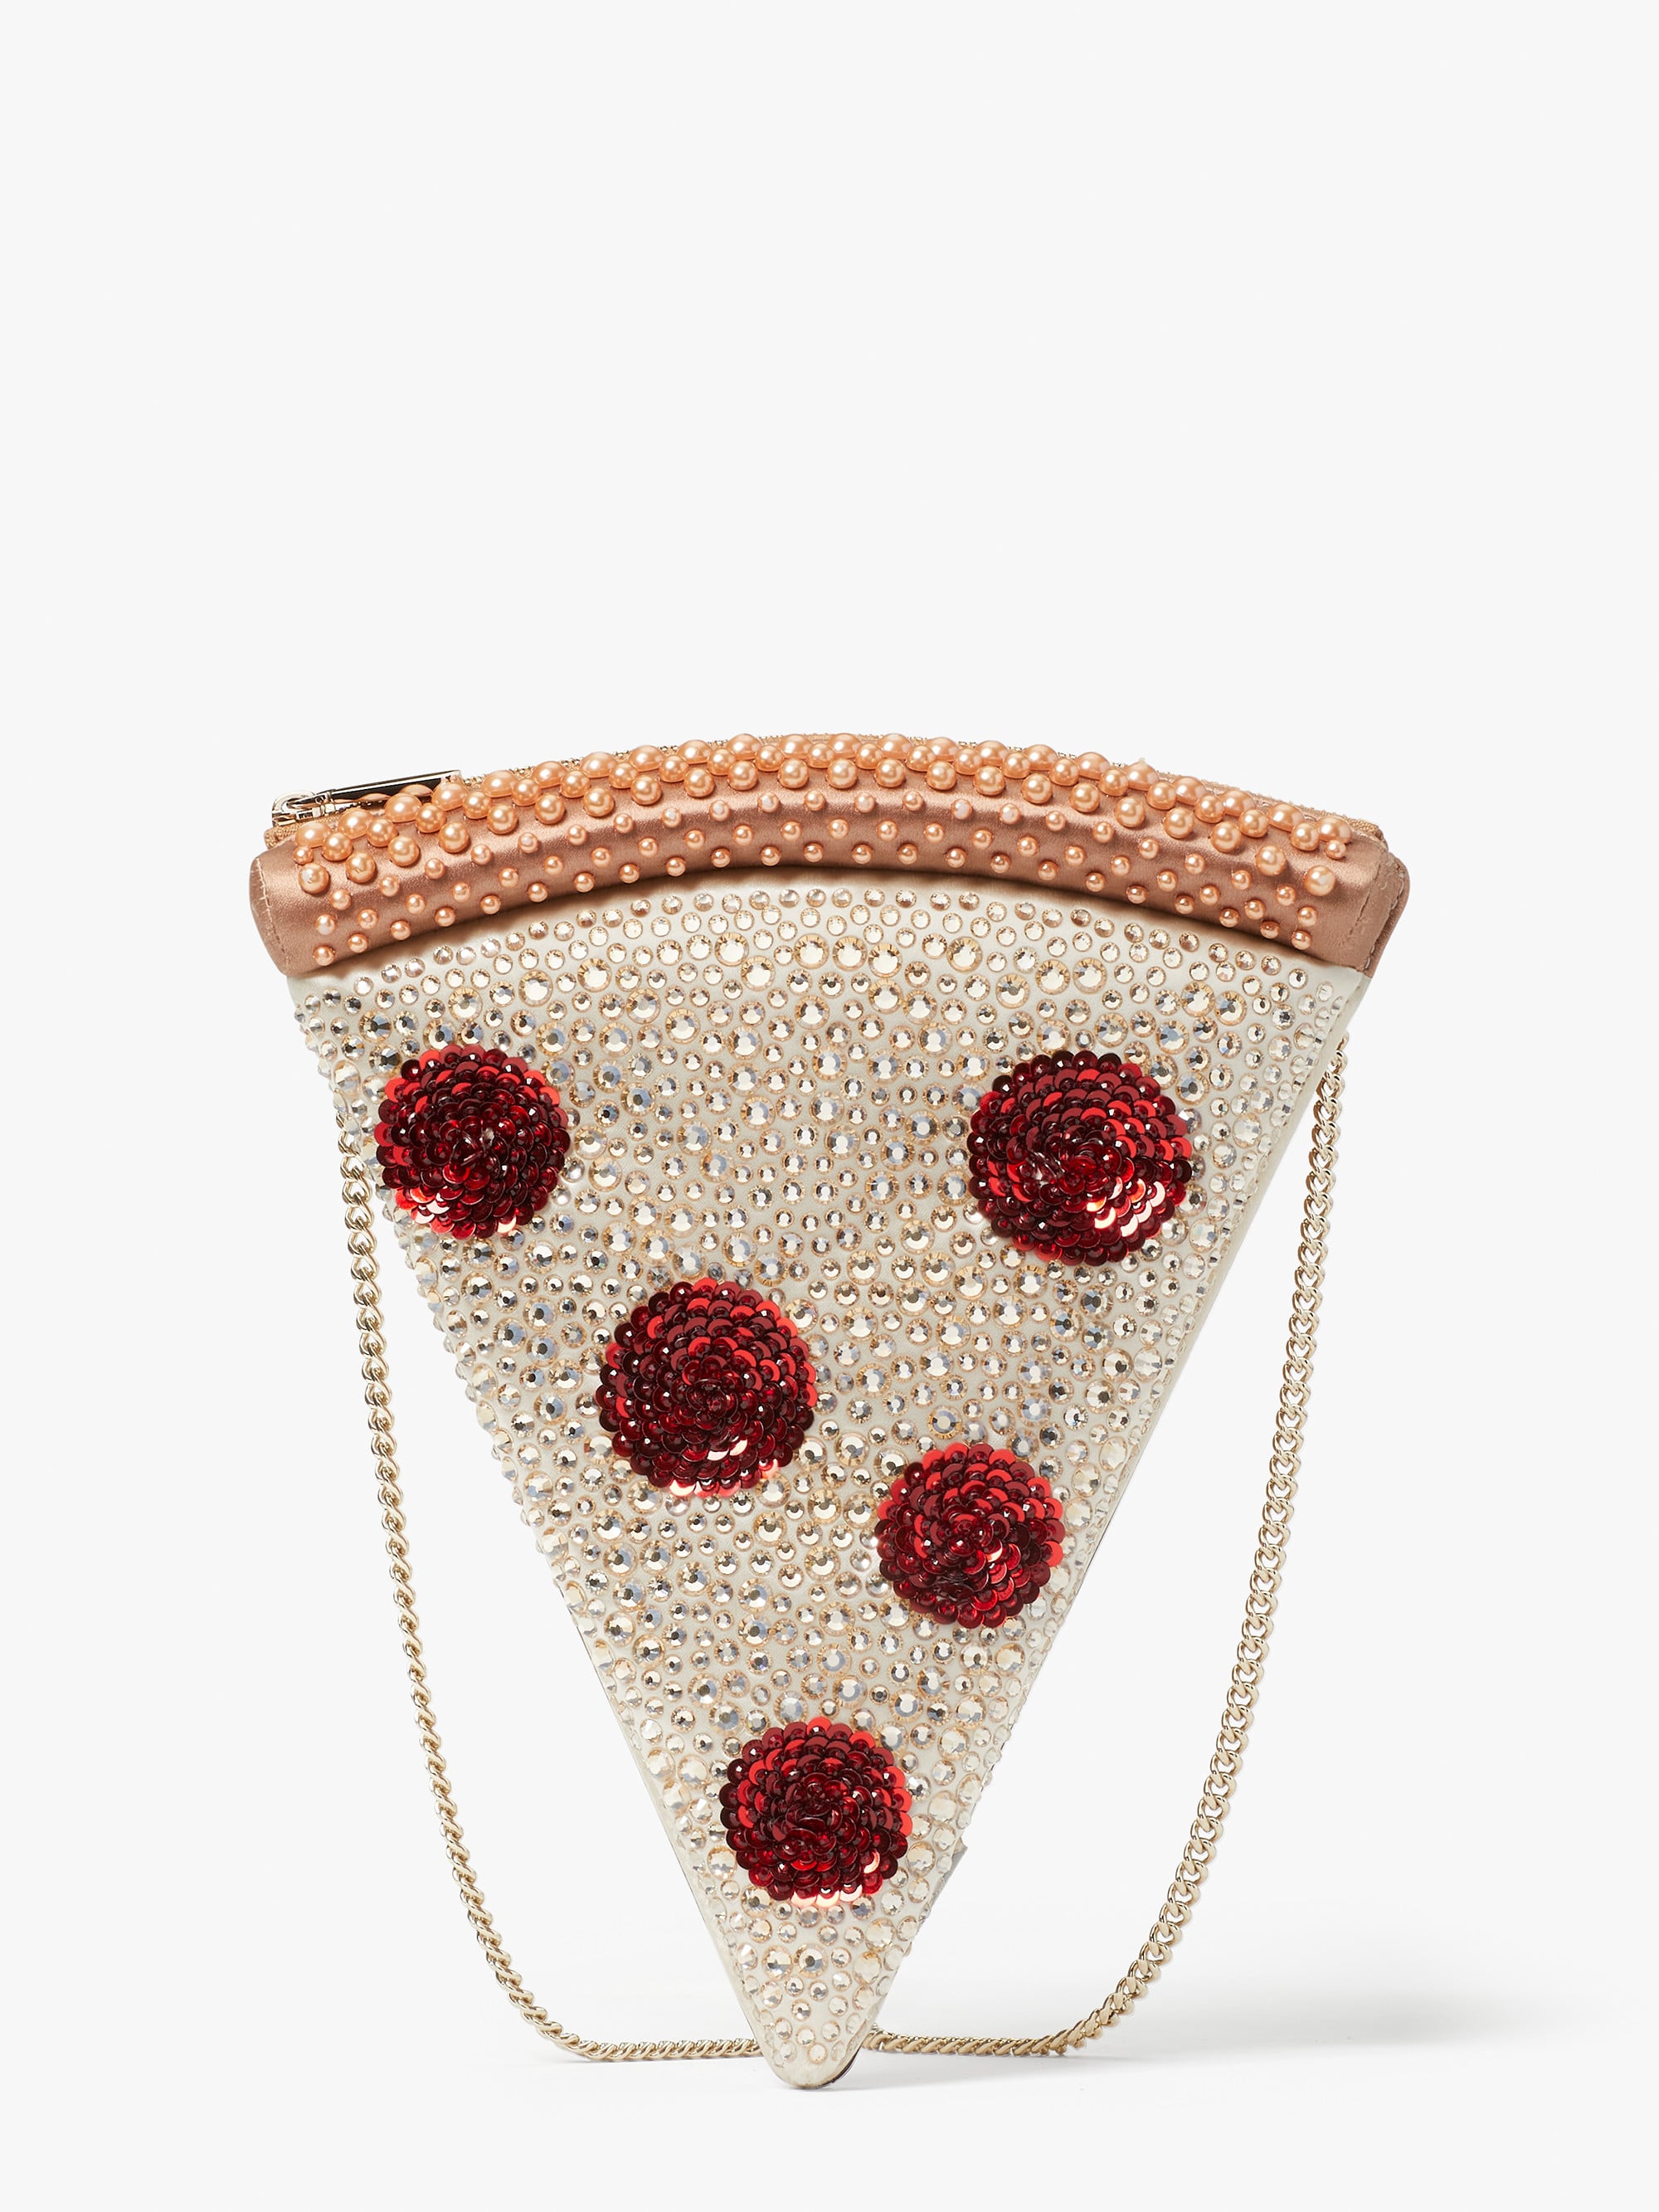 Kate Spade New York: 2021 Pizza Collection Has Bags, Jewelry | POPSUGAR  Fashion